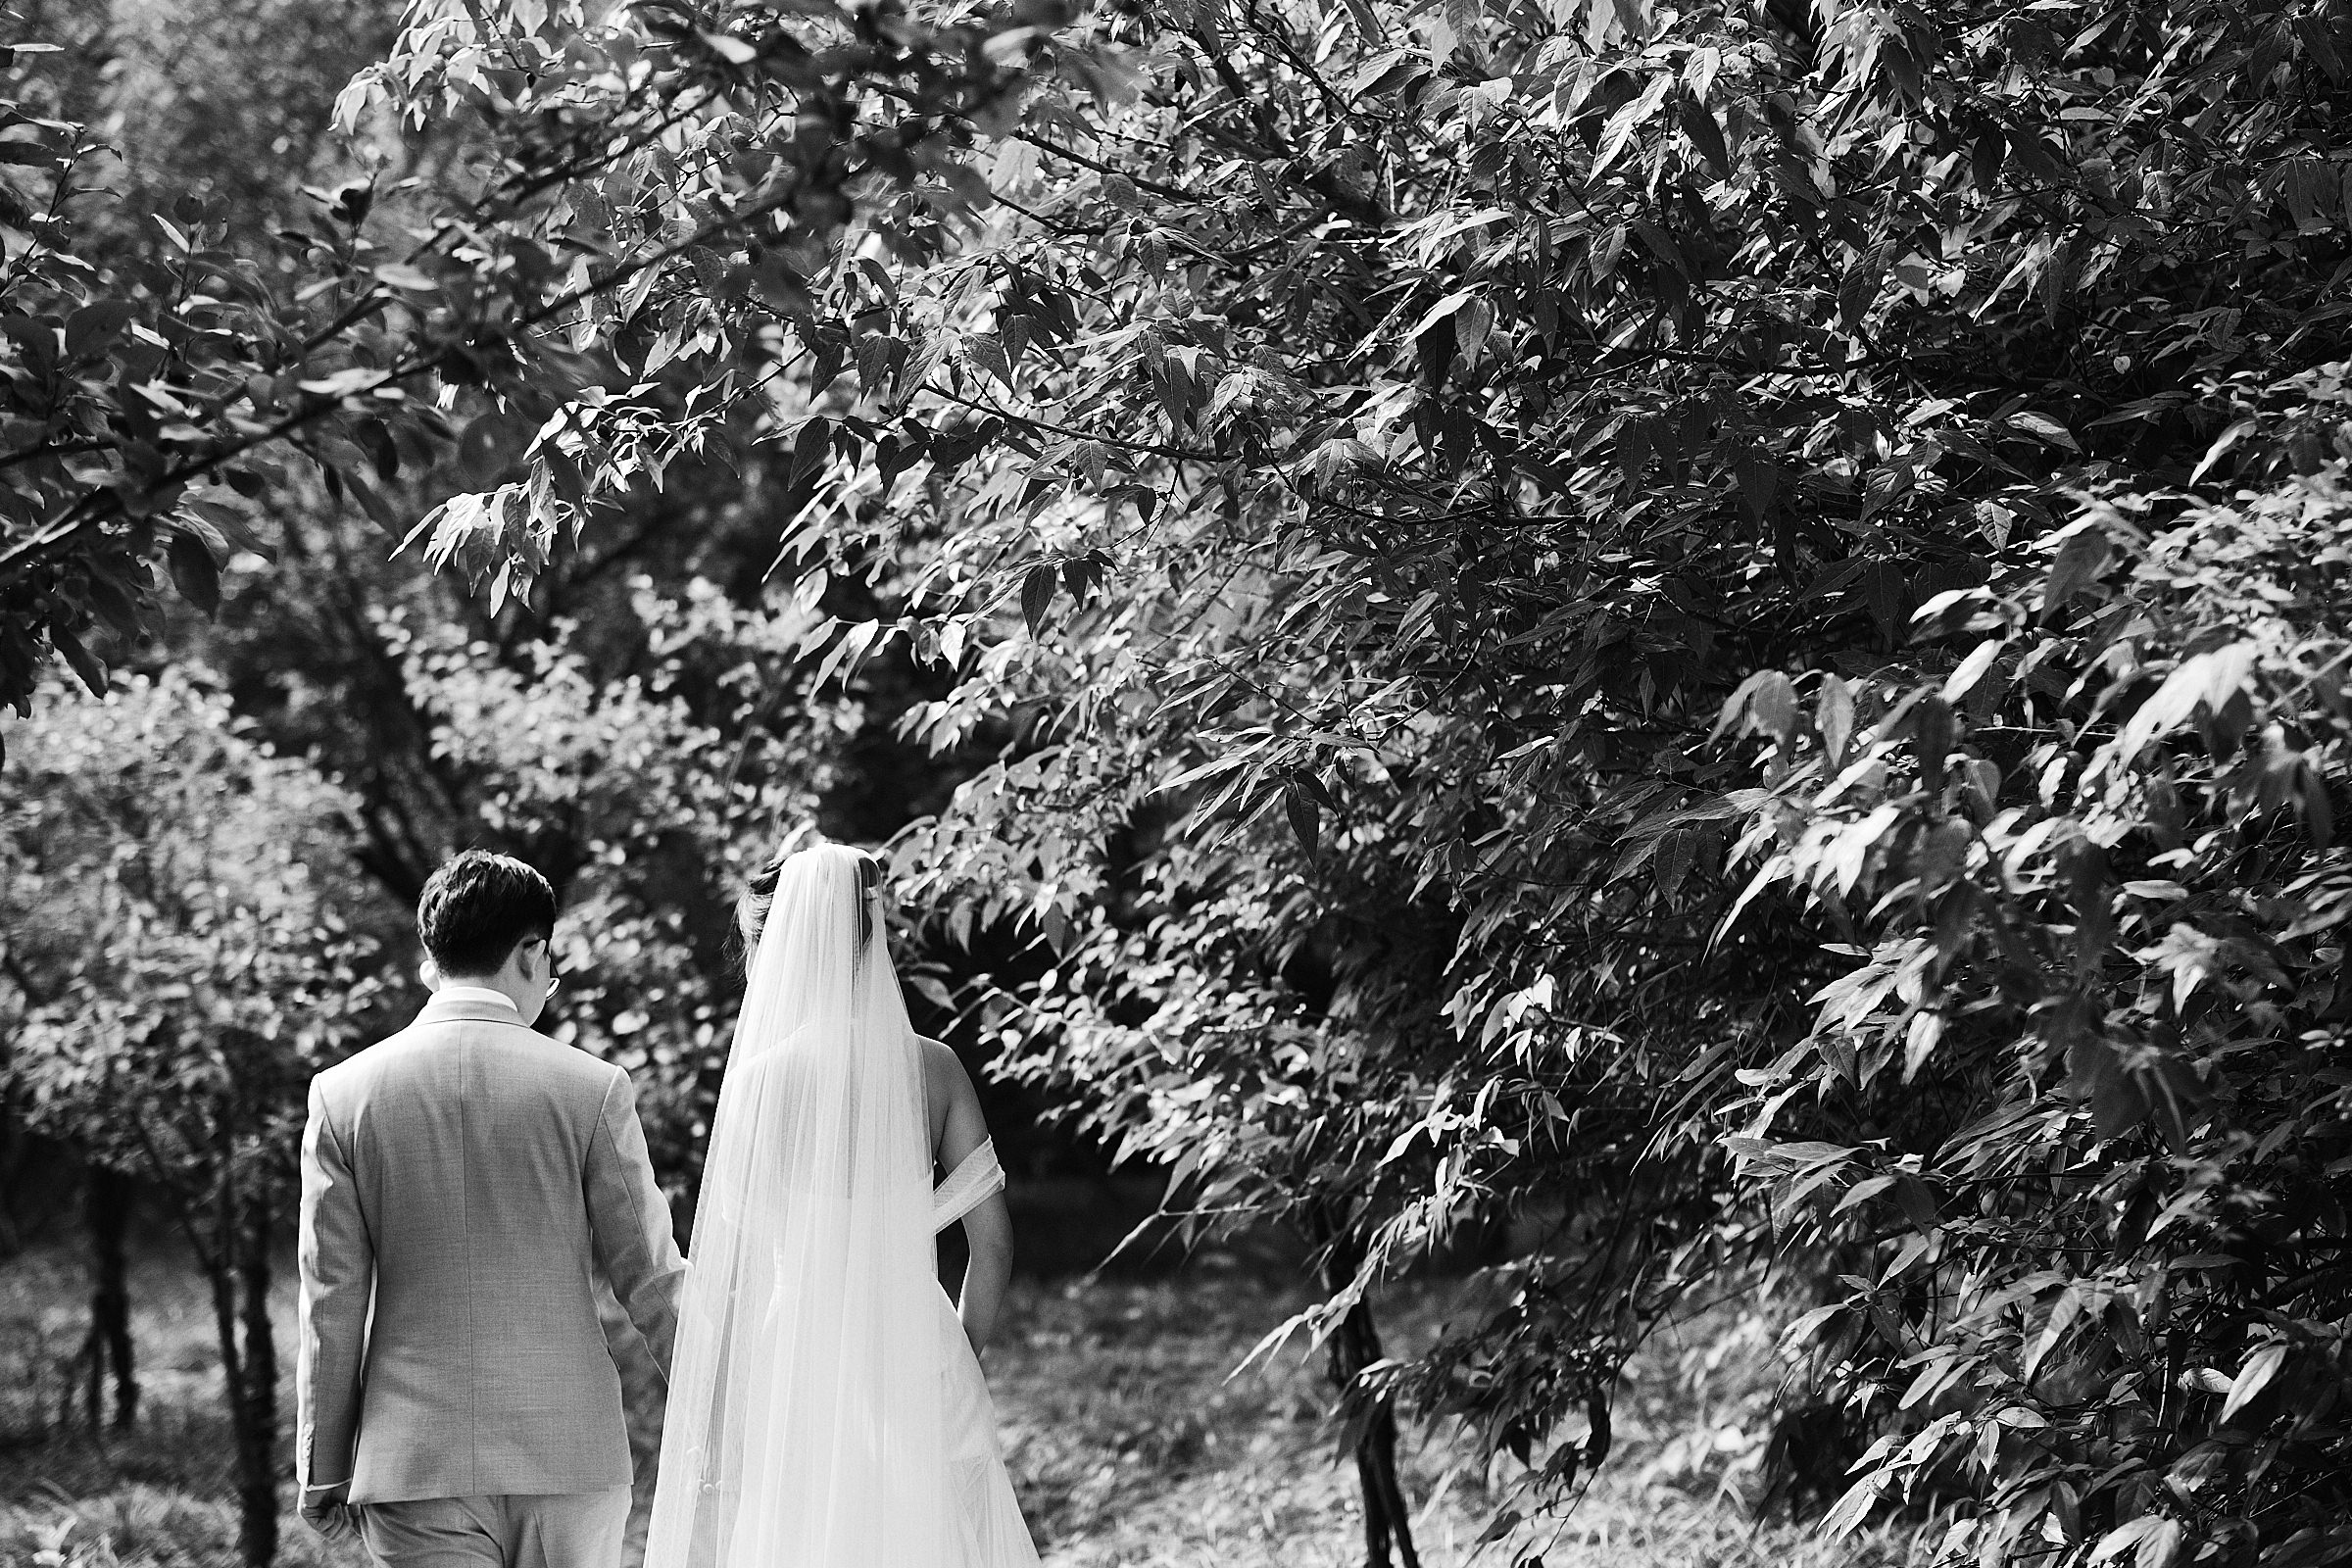 Bride And Groom Walk Away In The Midst Of Trees Holding Hands In Black And White In China Wedding